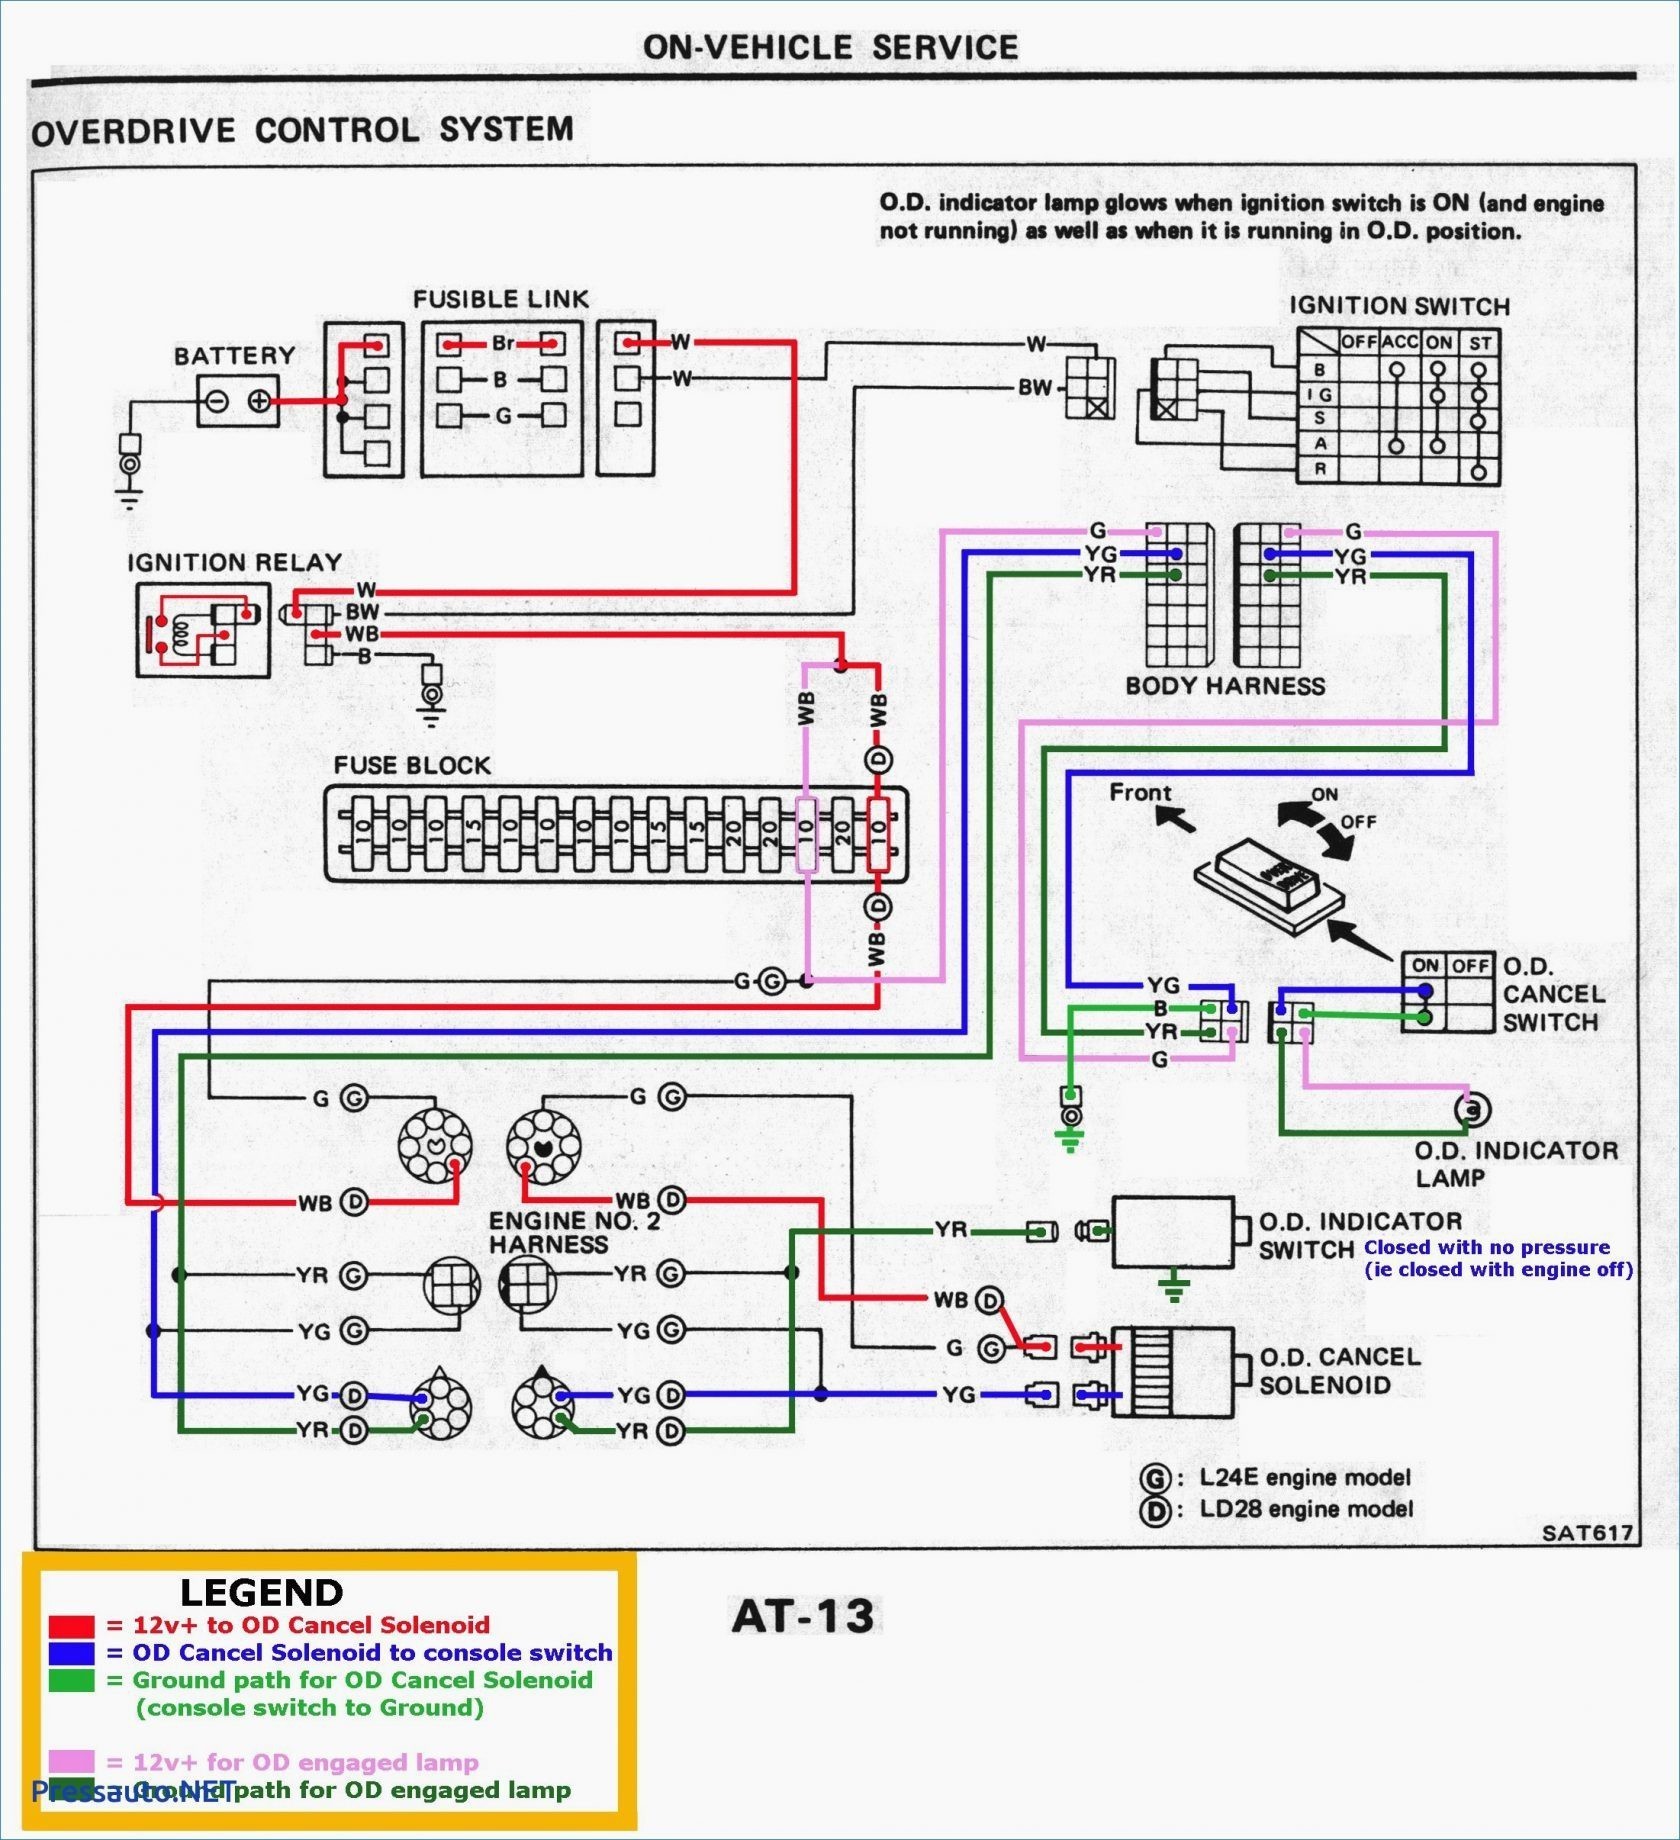 05 f150 fuse box diagram lovely 2006 king ranch wiring diagram wiring diagram data today of 05 f150 fuse box diagram